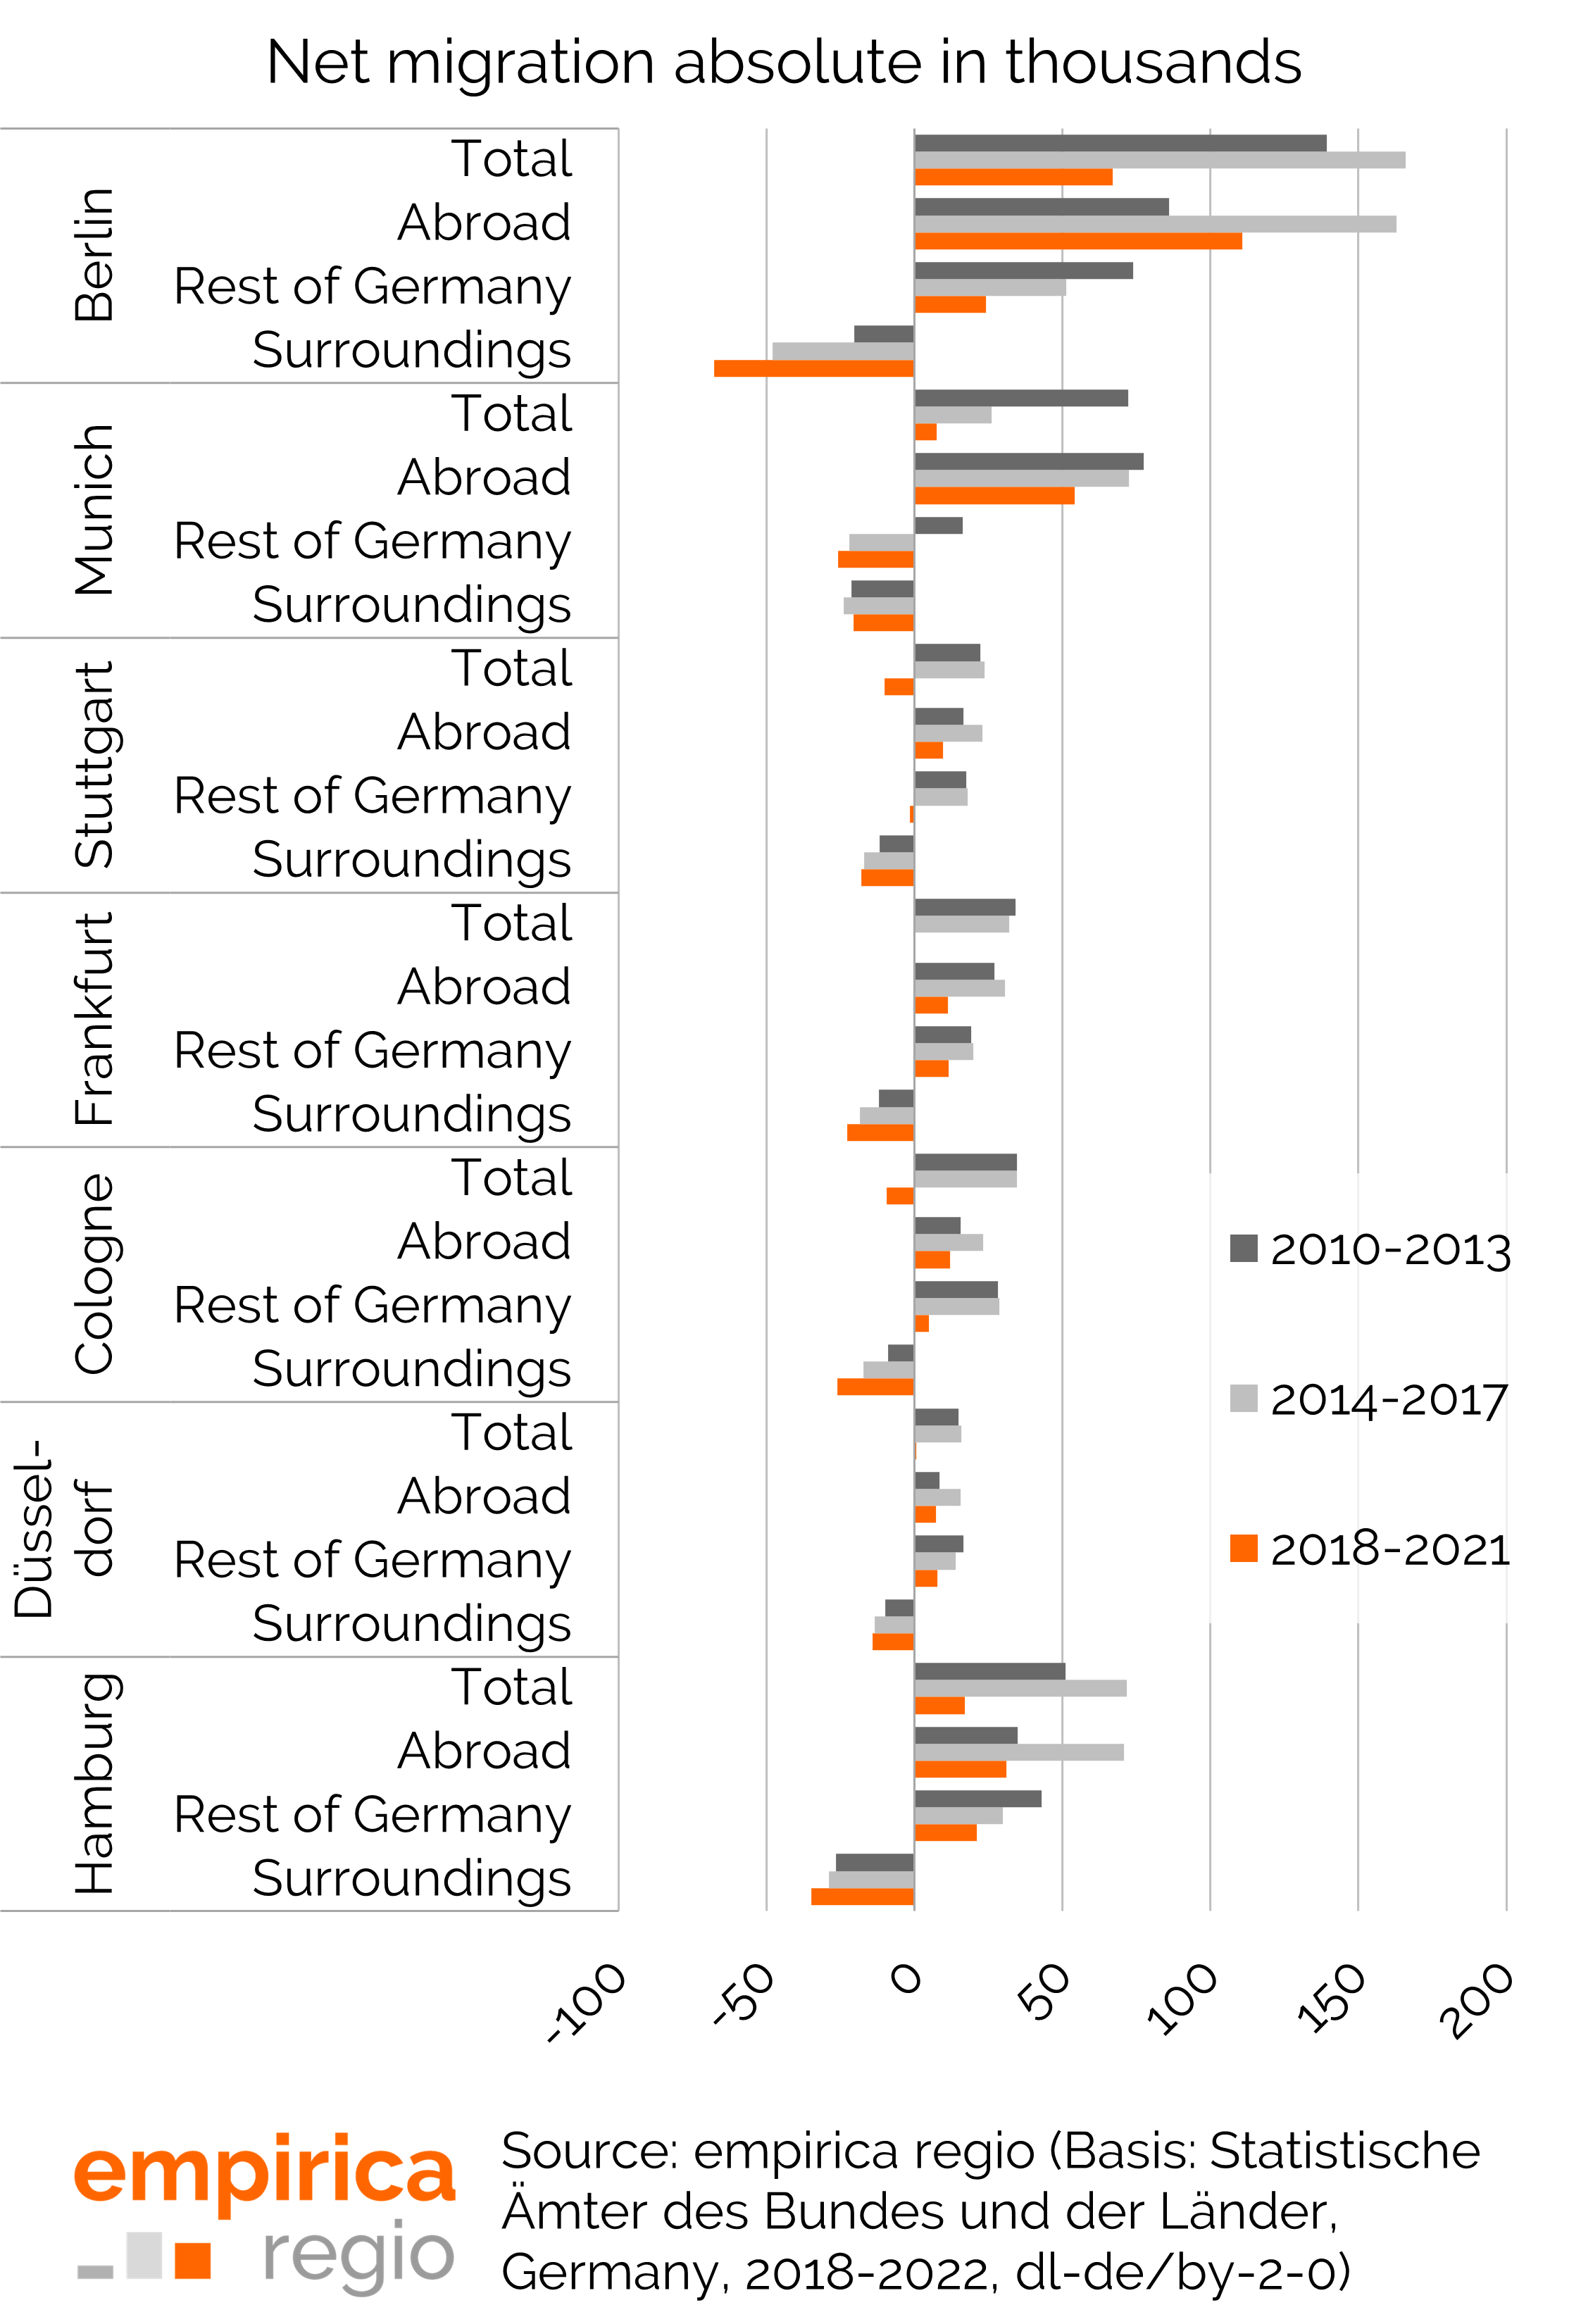 Absolute net migration of the top 7 cities in the years 2005 to 2021 within Germany